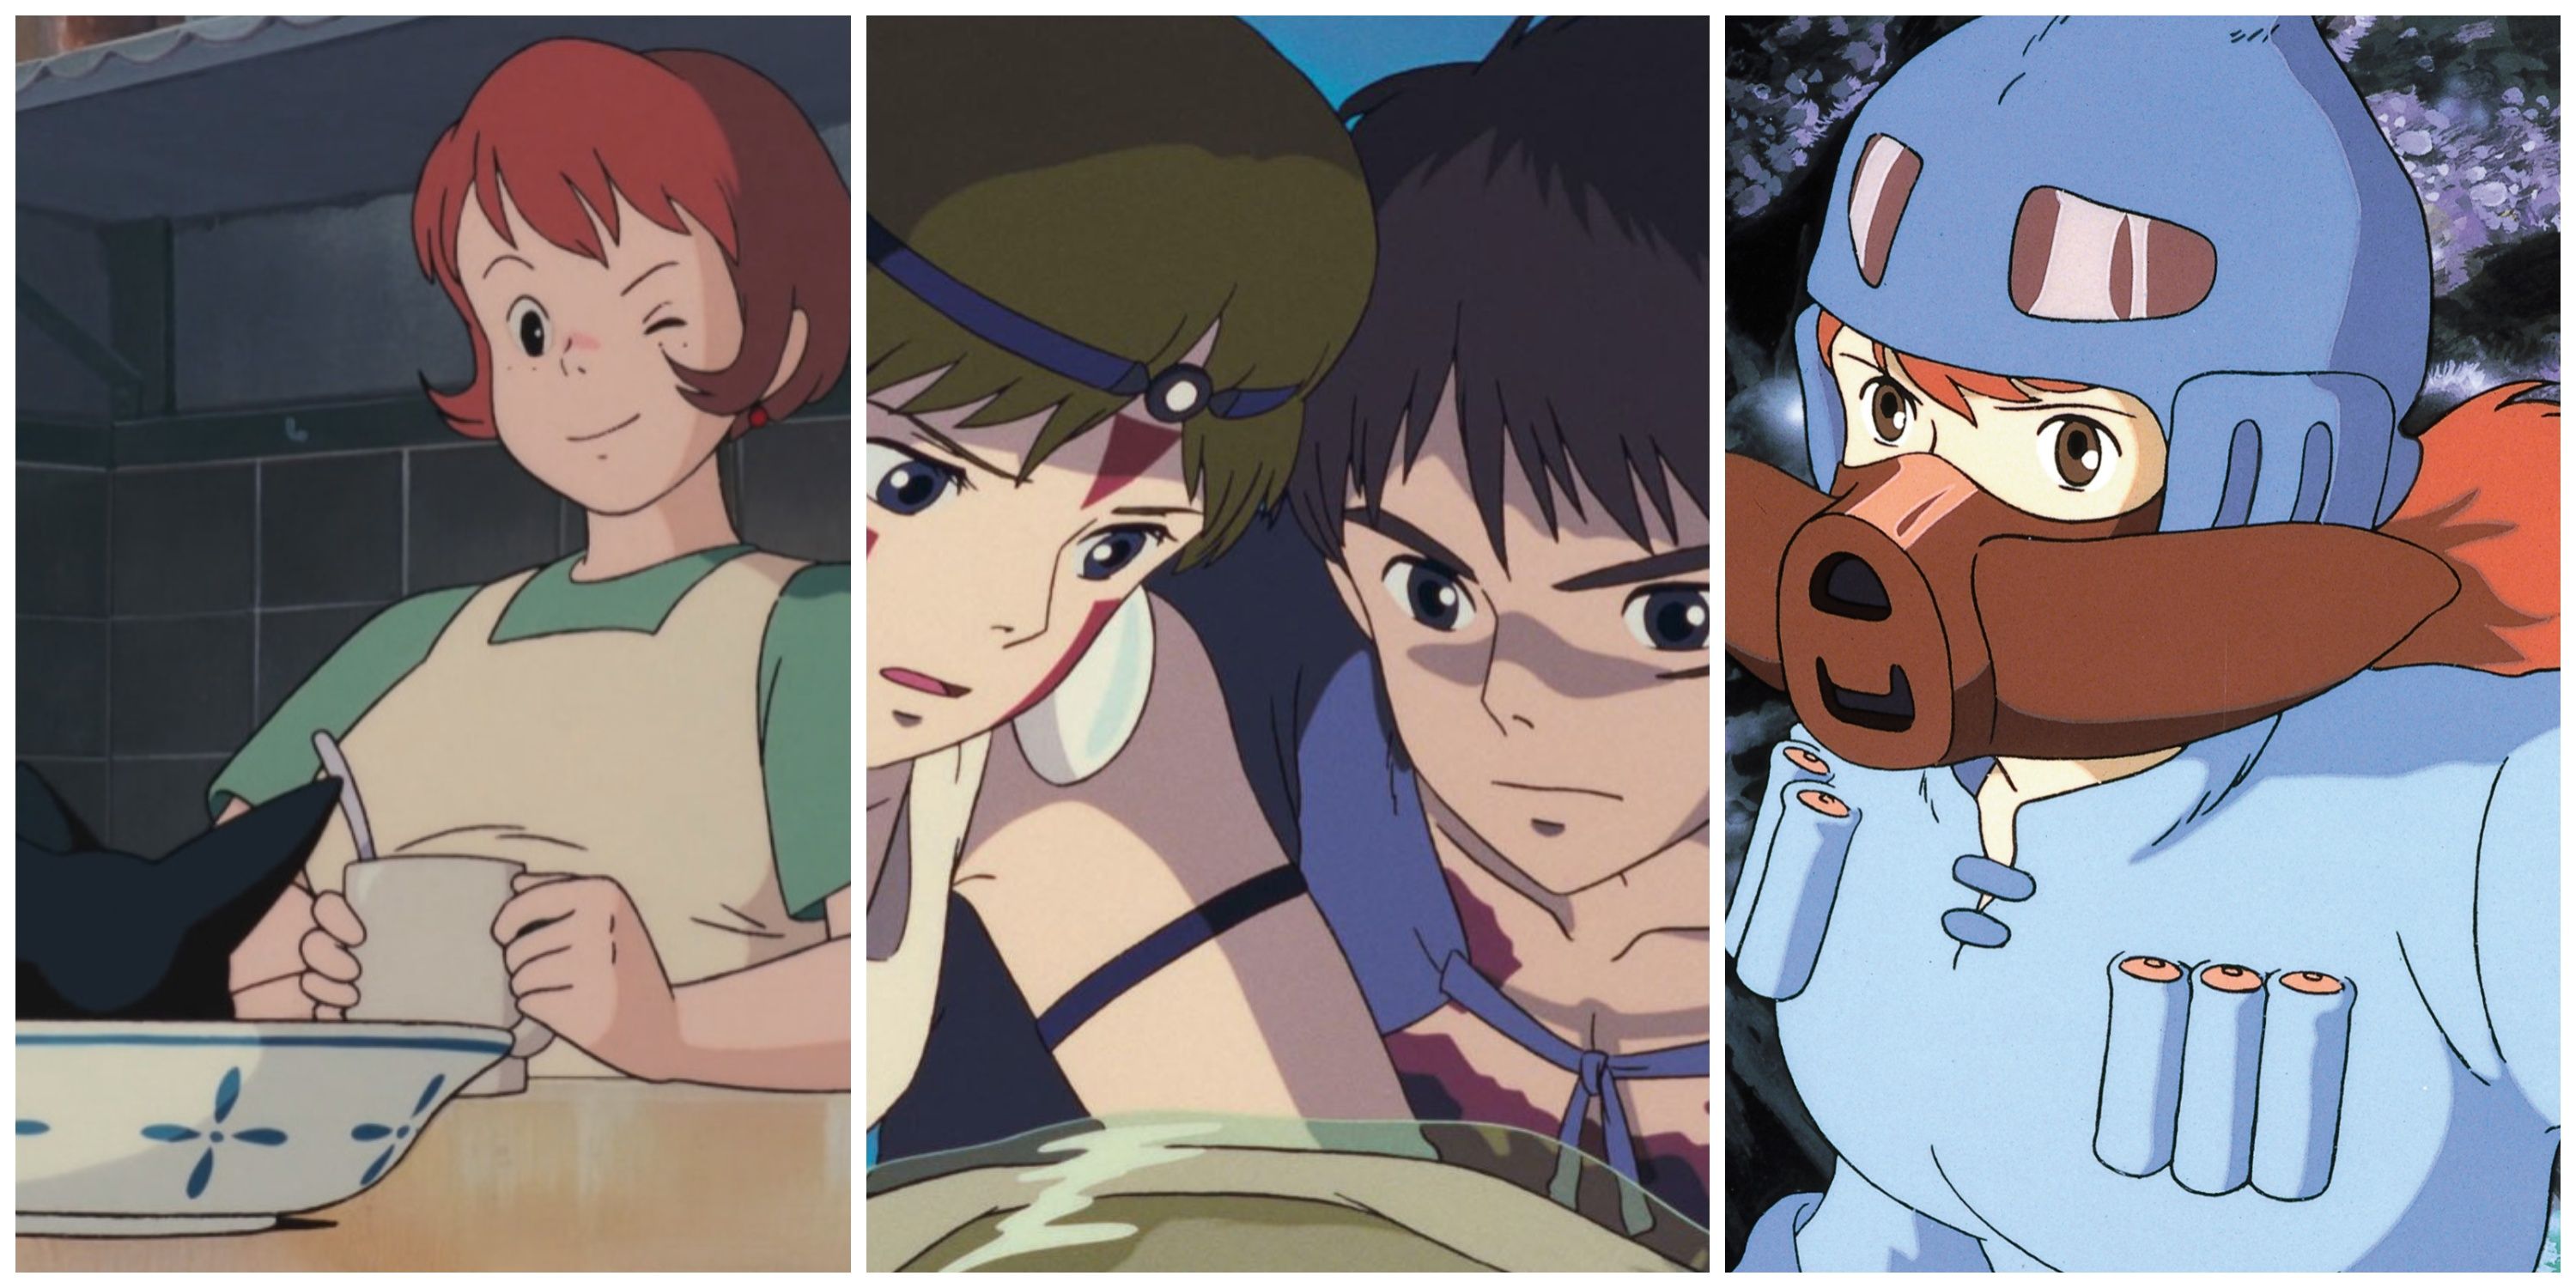 Split image, Osono winking at Jiji in Kiki's Delivery Service, San and Ashitaka looking at the head of the Forest God in Princess Mononoke, Nausicaa wearing flight gear in Nausicaa of the Valley of the Wind